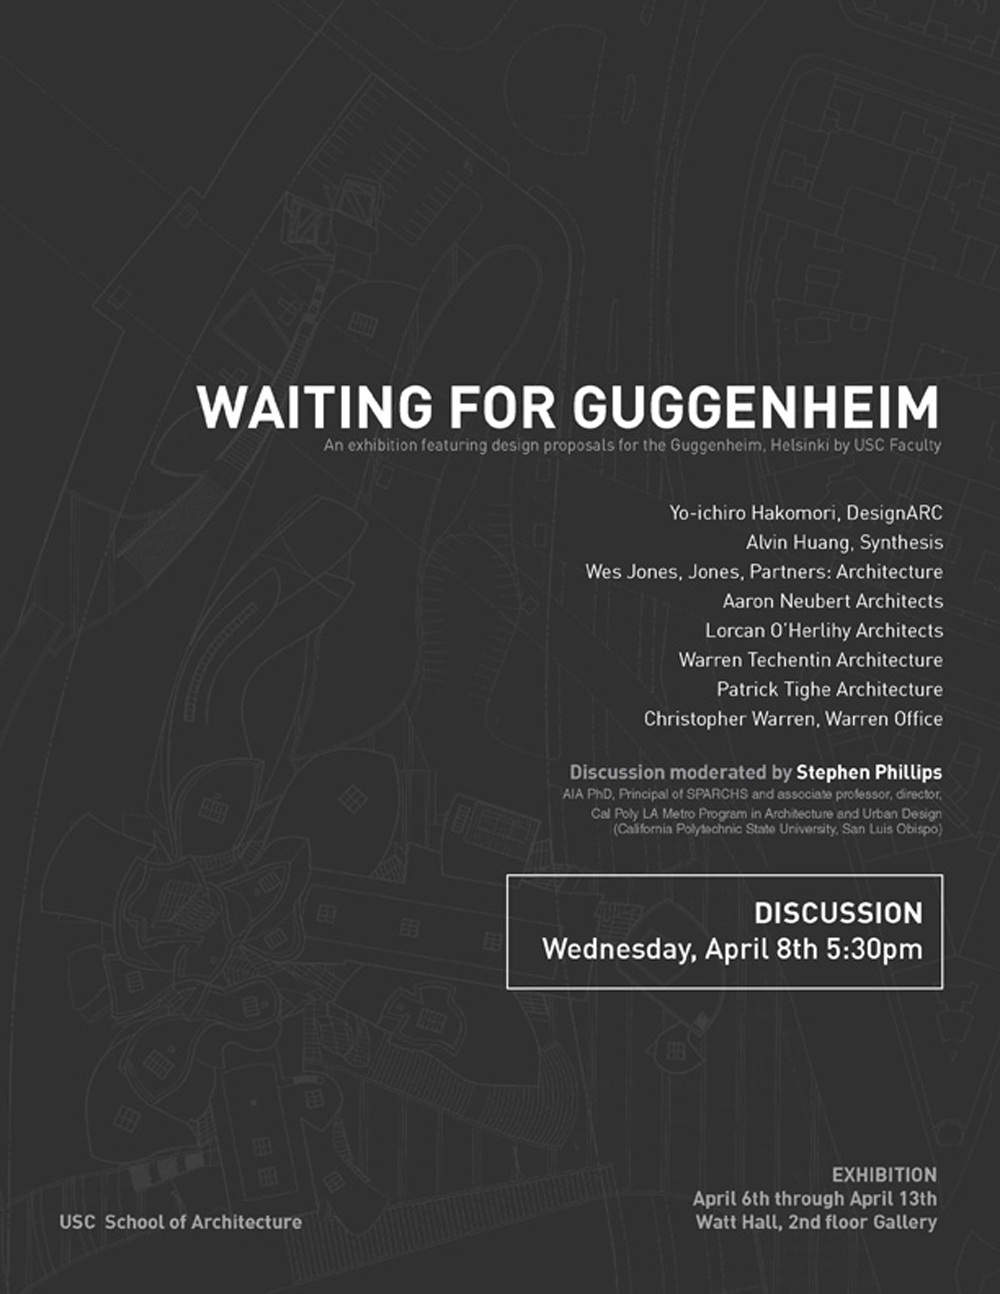 Waiting for Guggenheim Exhibition – University of Southern California